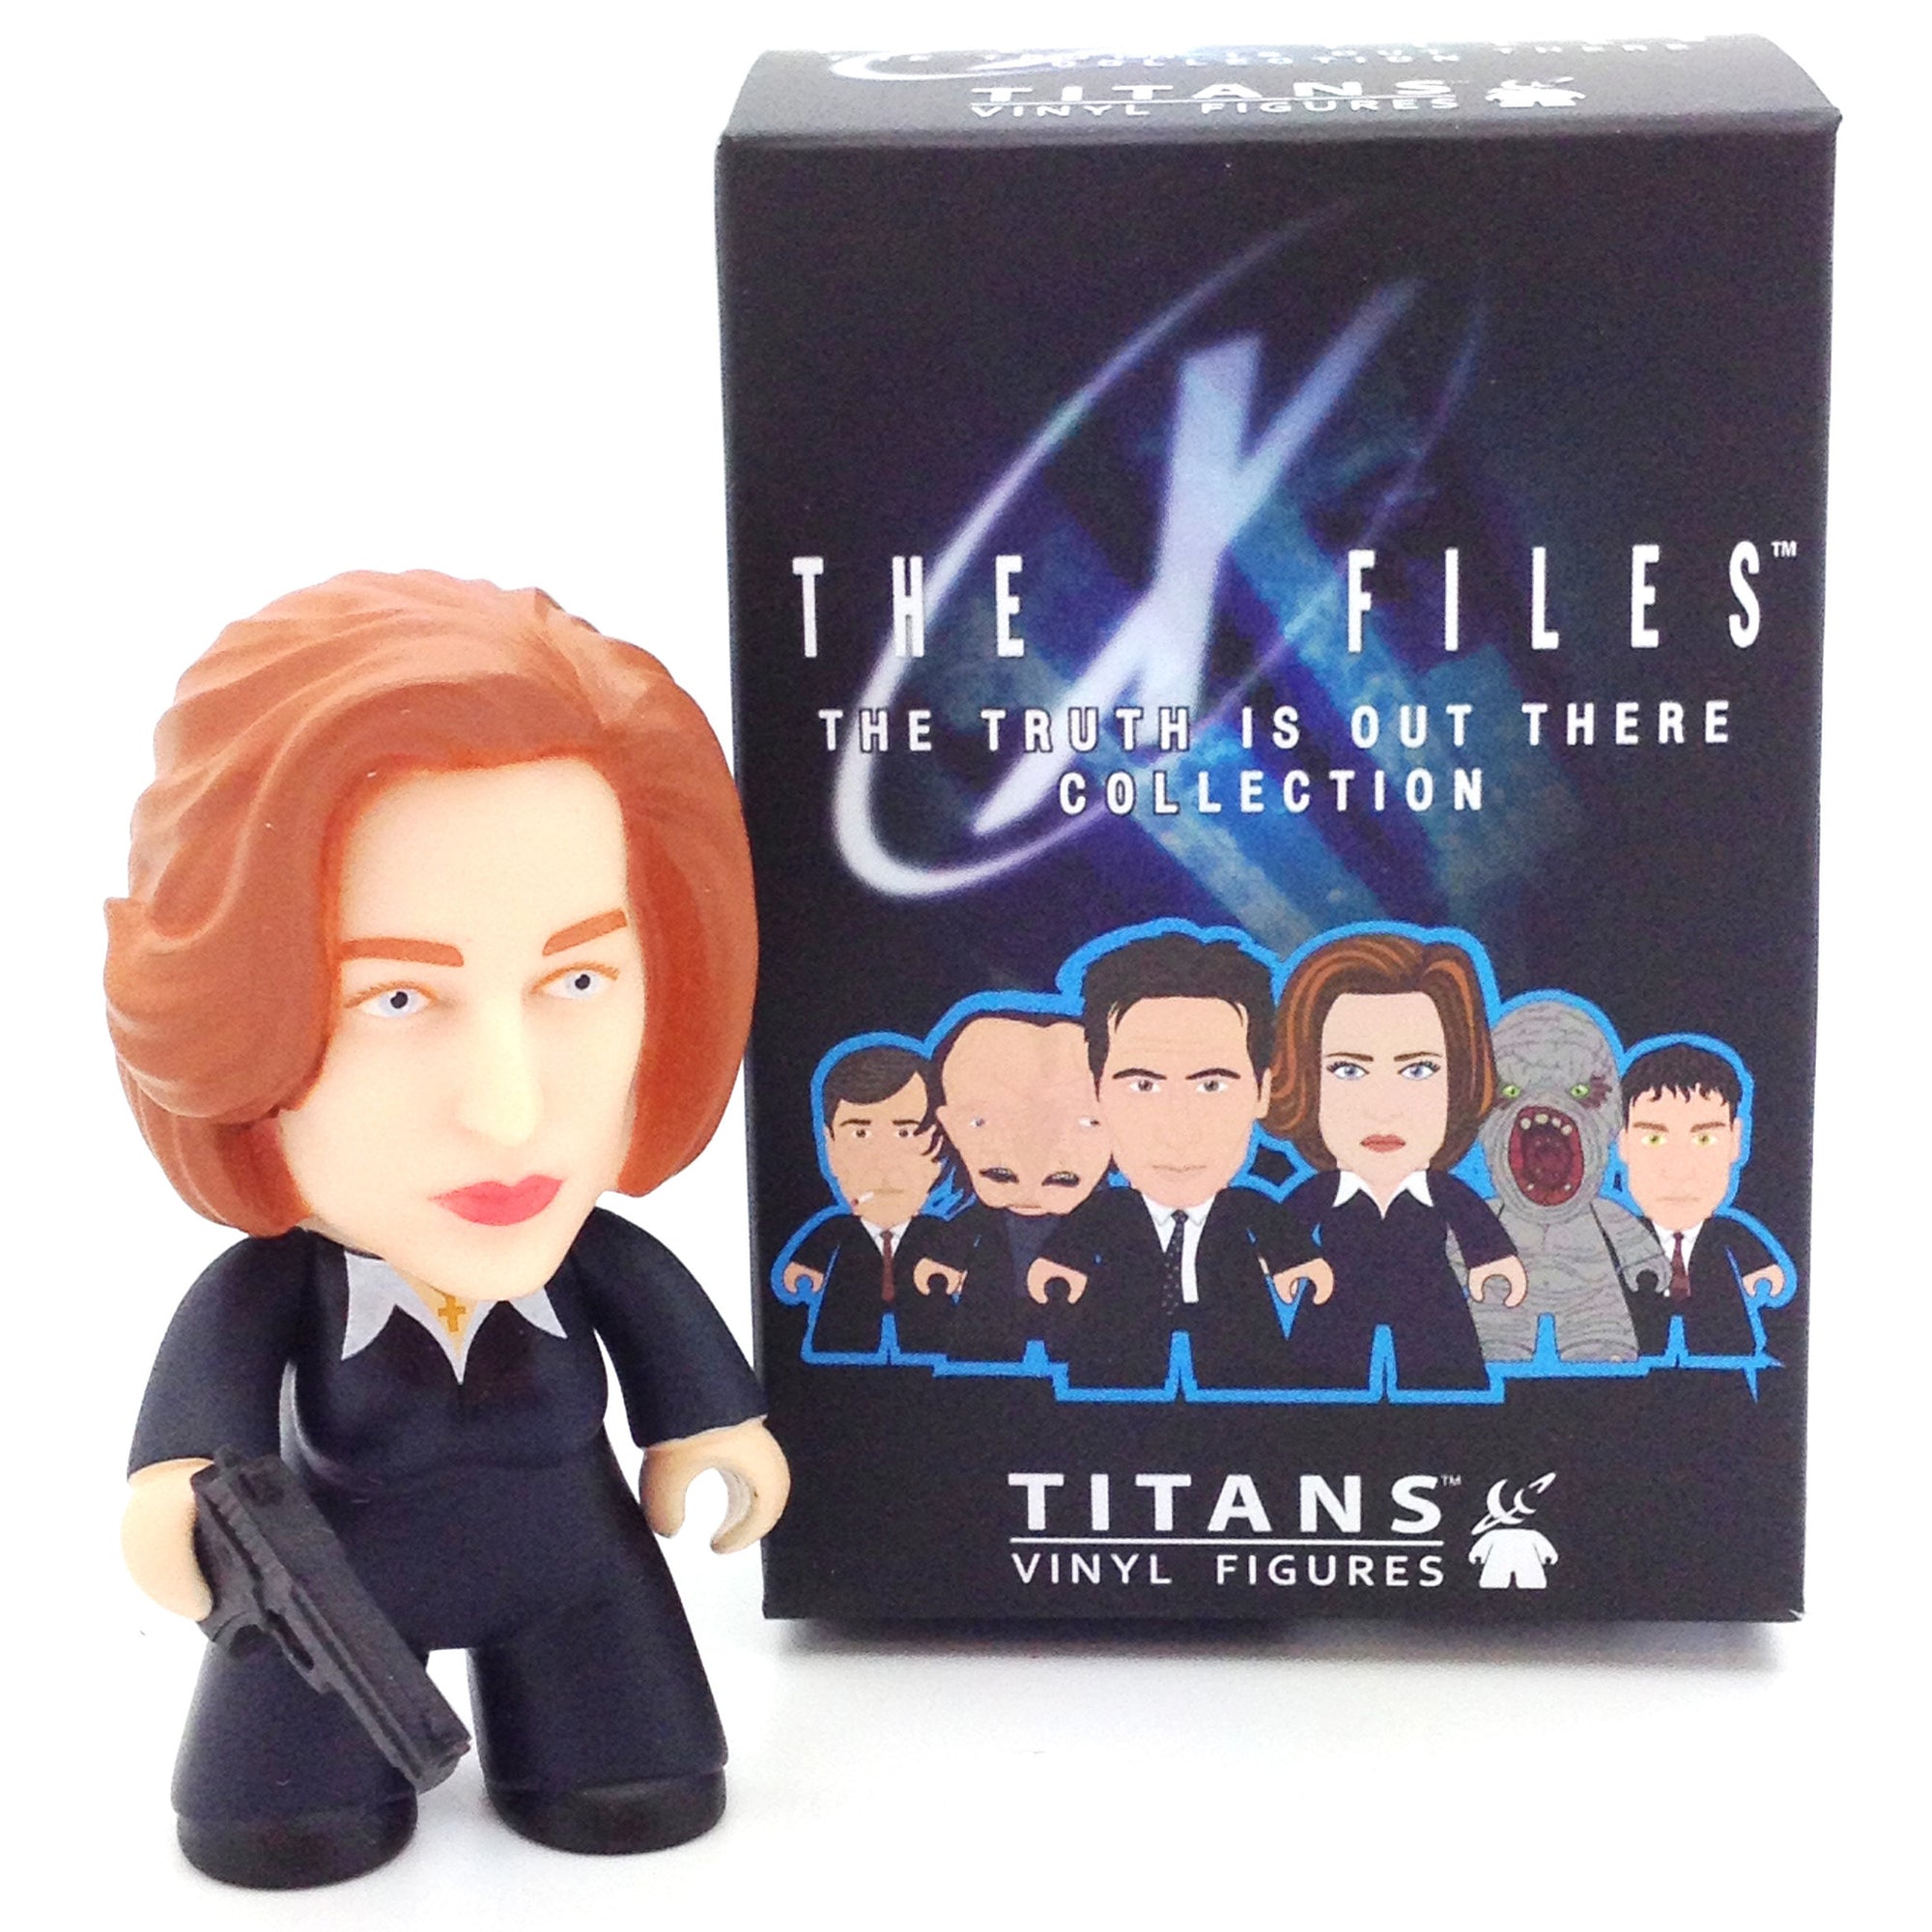 X-Files: The Truth Is Out There Blind Box Titans Mini Series - Scully - Mindzai
 - 2